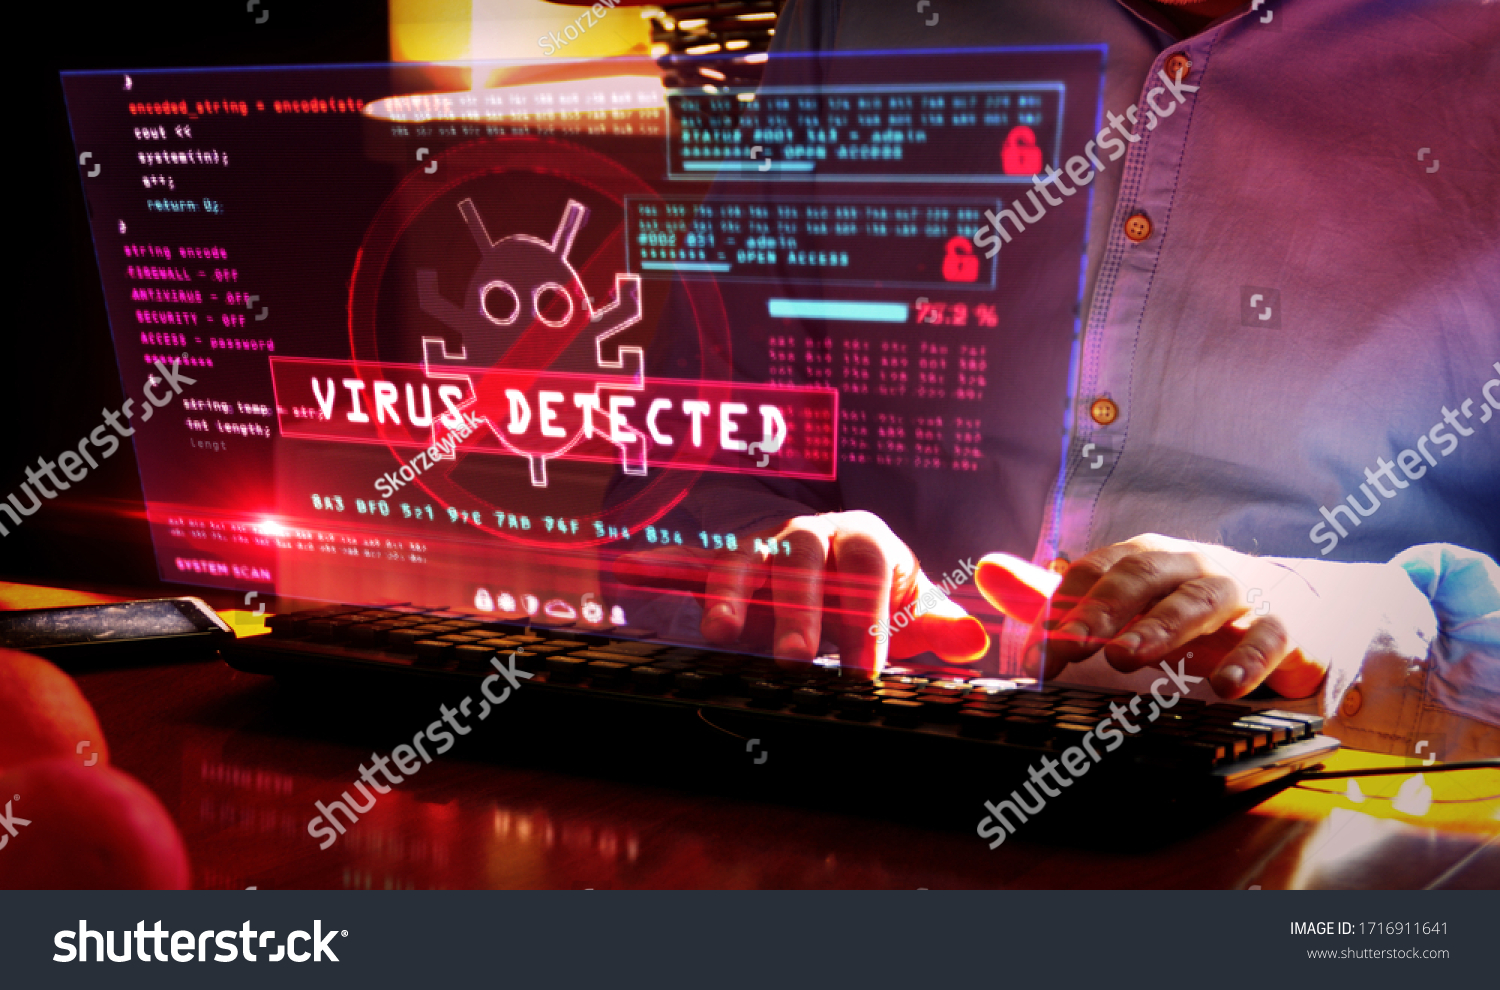 Virus detected alert on computer screen. Cyber security breach warning with worm symbol and system protection concept 3d illustration with glitch effect. #1716911641